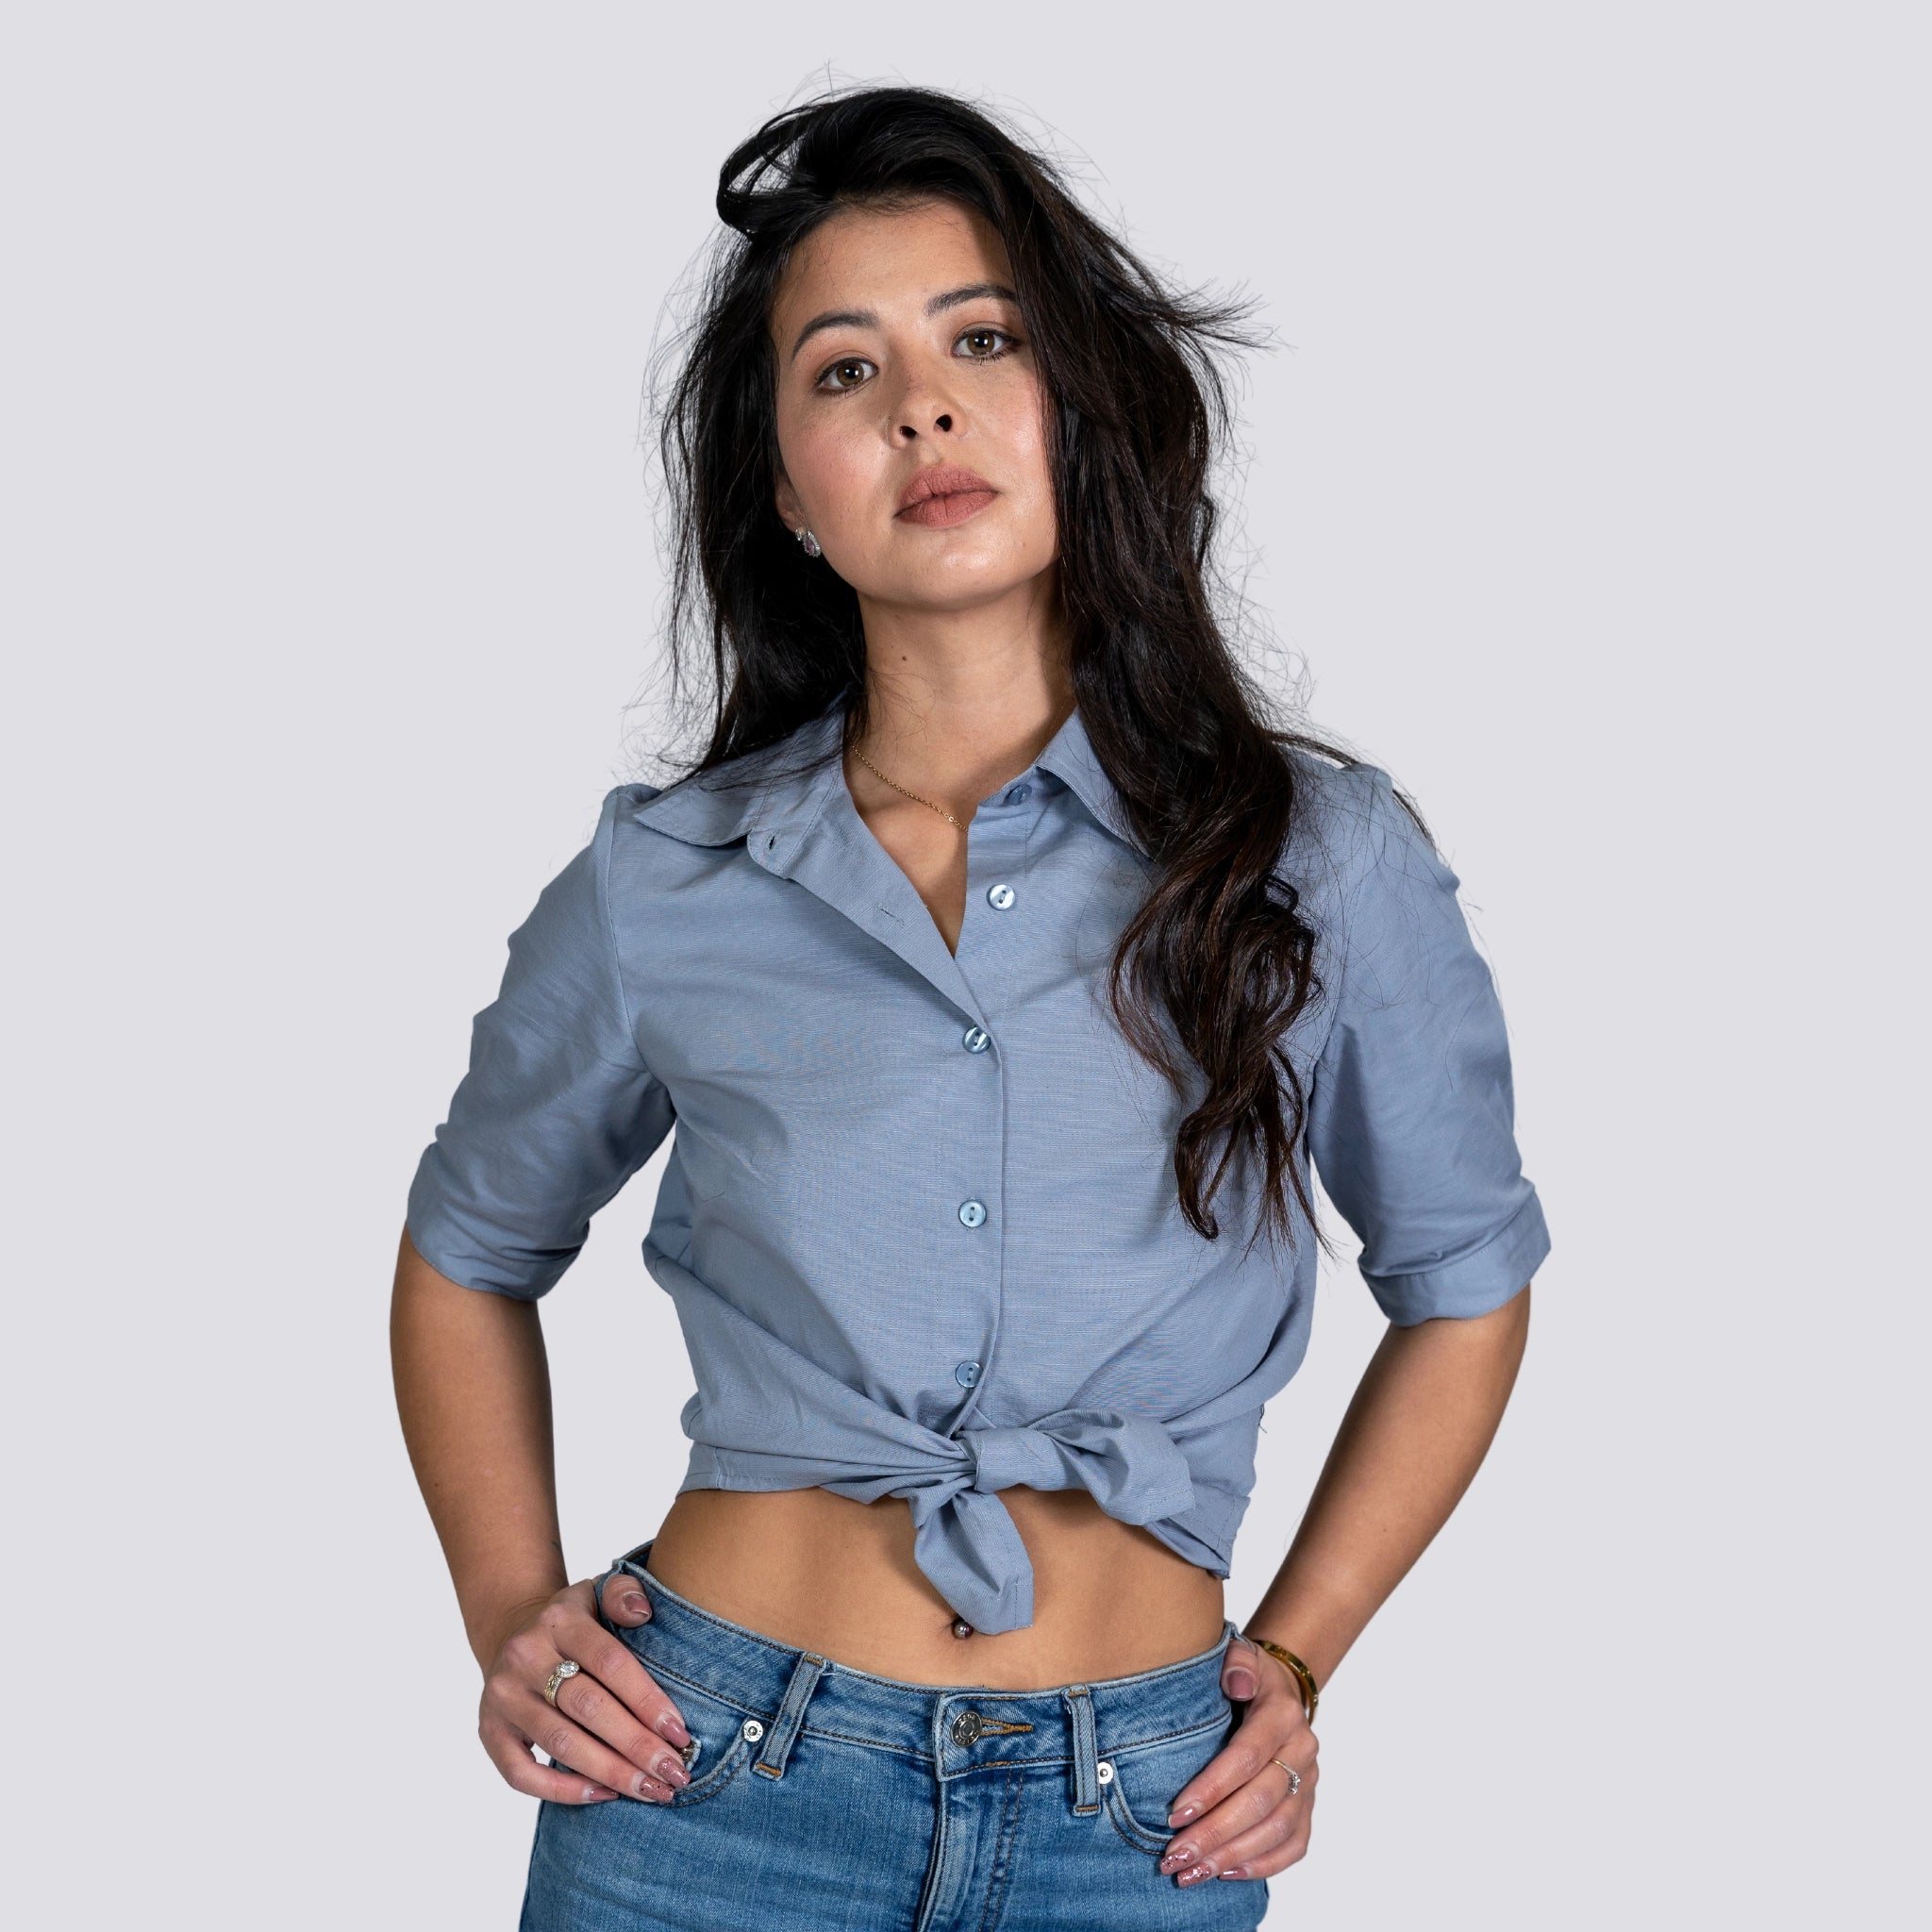 A woman with long dark hair wearing a Karee Grey Mist Linen Shirt For Women and jeans, standing confidently against a grey background.